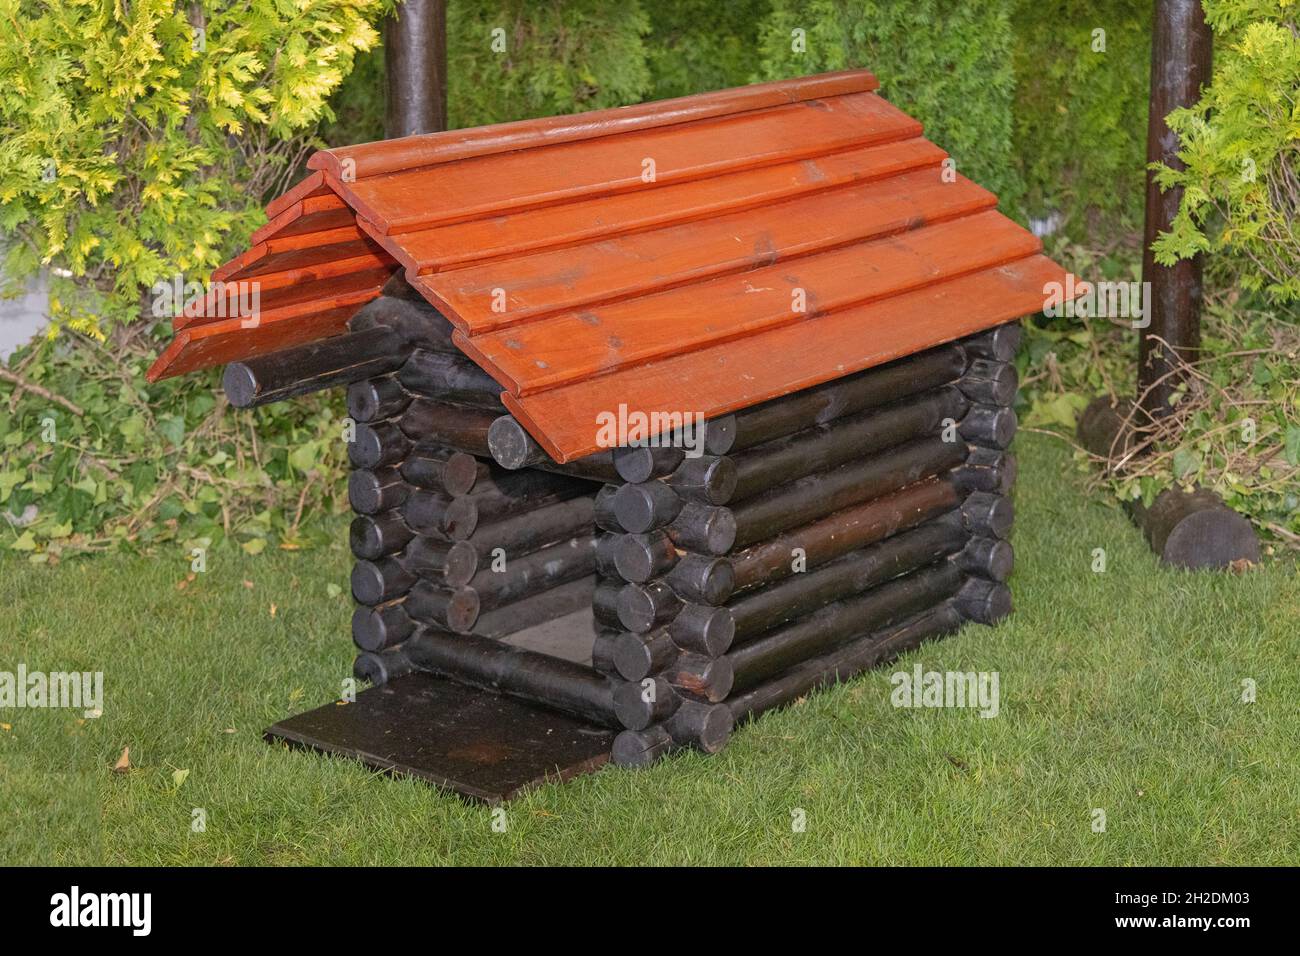 Wood Log Cabin Large Dog House With Roof Stock Photo